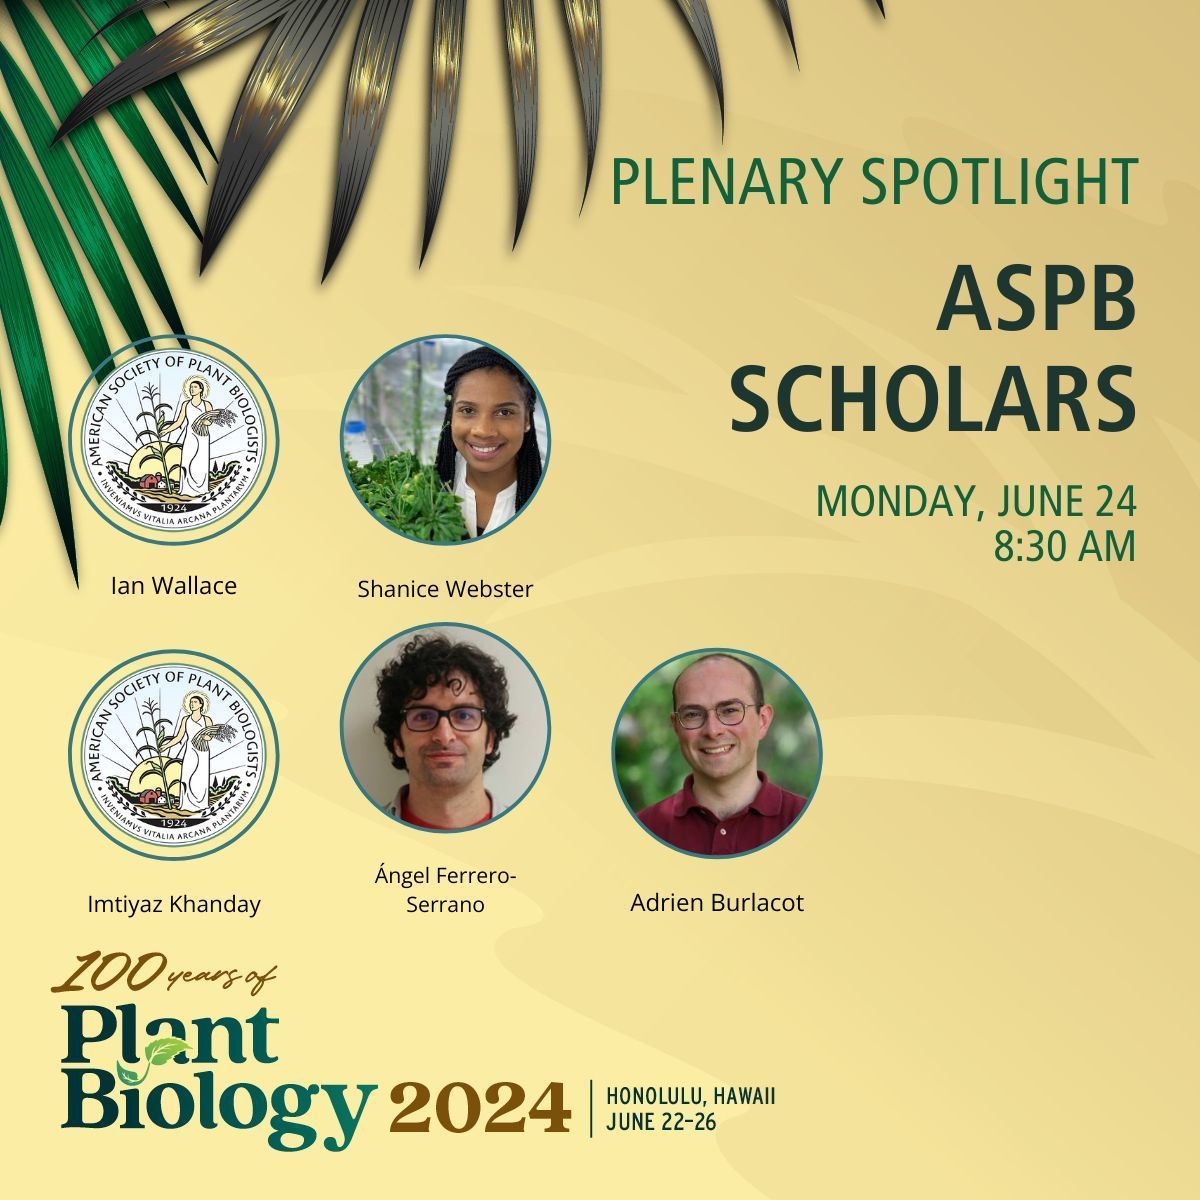 Celebrate our centennial by diving into the ground-breaking research of the next generation of plant scientists. This #PlantBio2024 plenary explores metabolite- and microbiota-based engineering, photosynthesis and much more. Learn more & register today at buff.ly/2S7TqXp